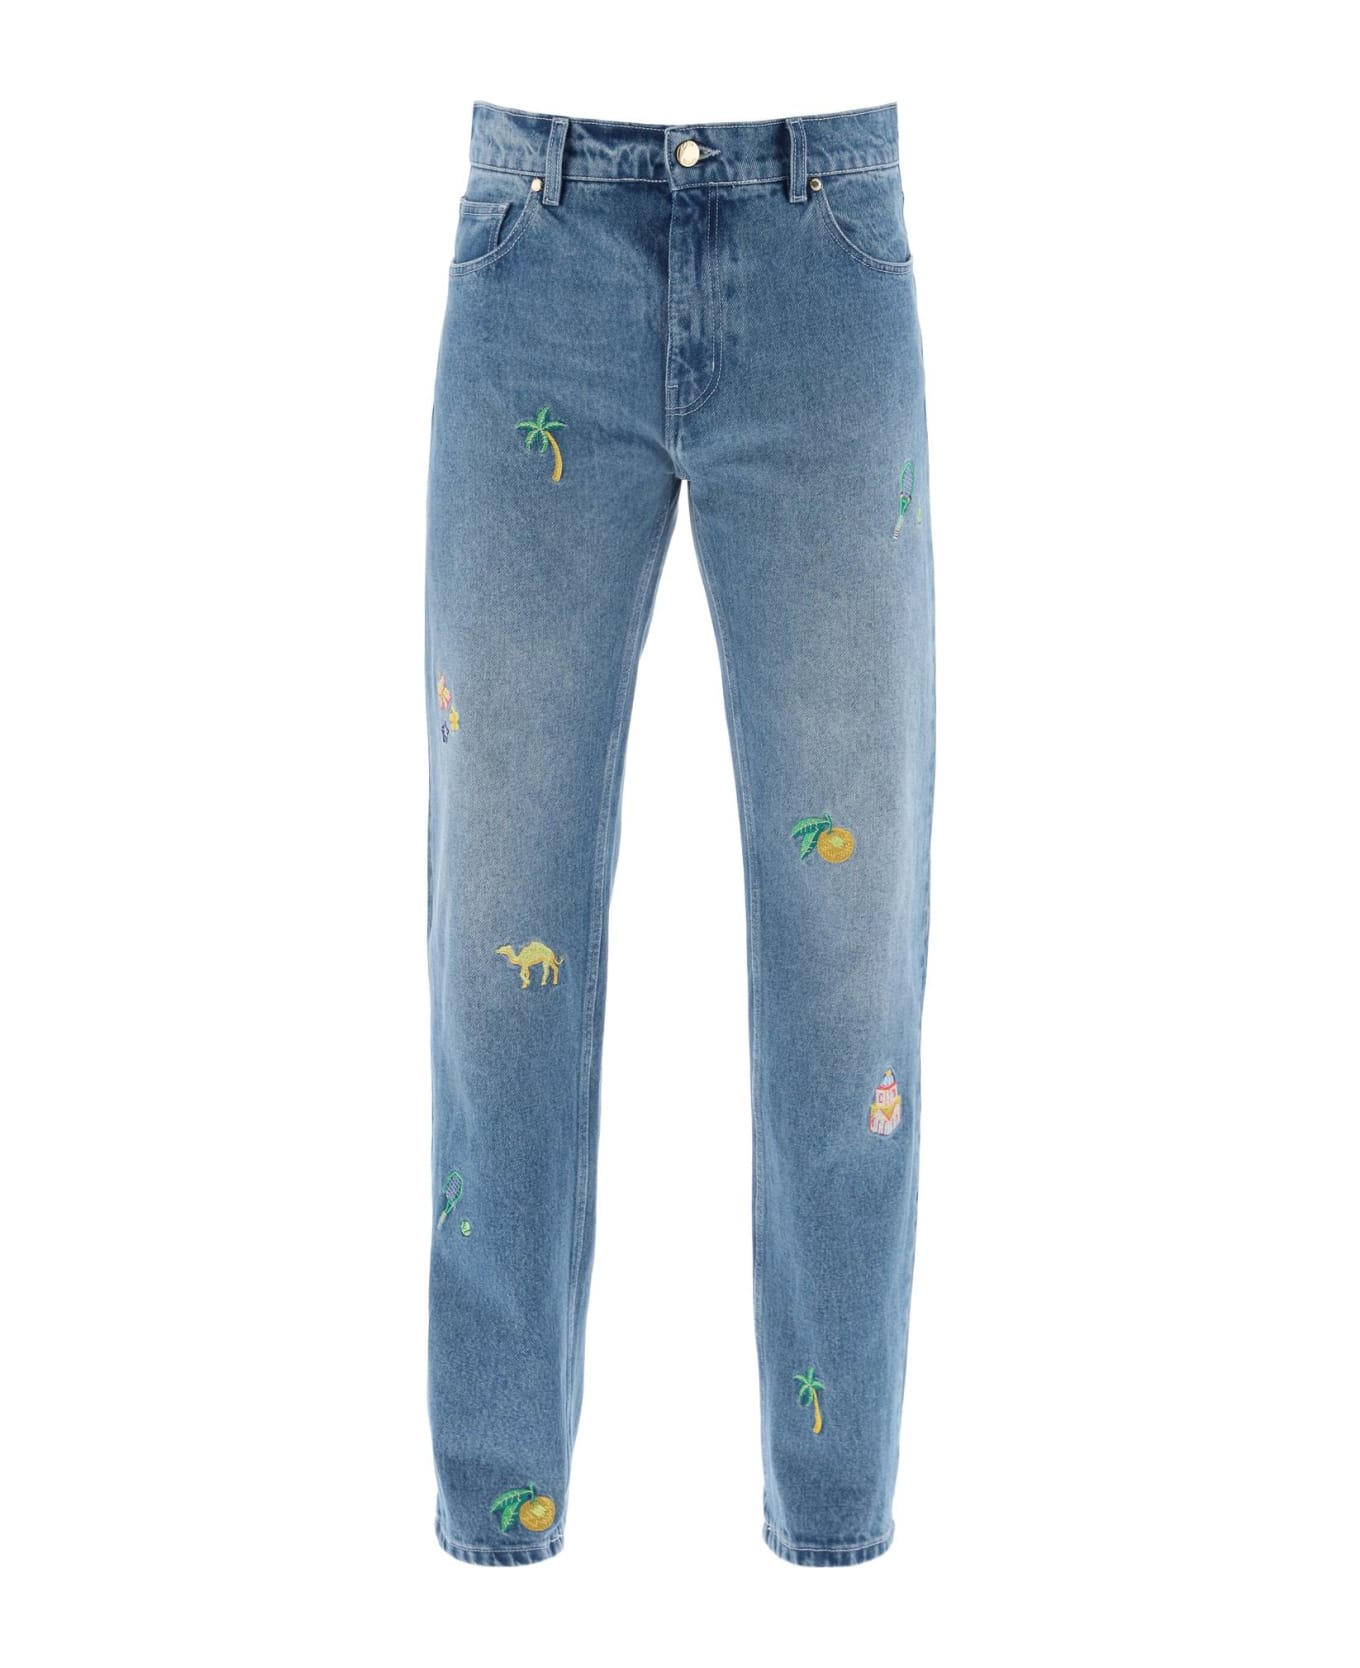 Casablanca Embroidered Straight Jeans - STONE WASH (Light blue)